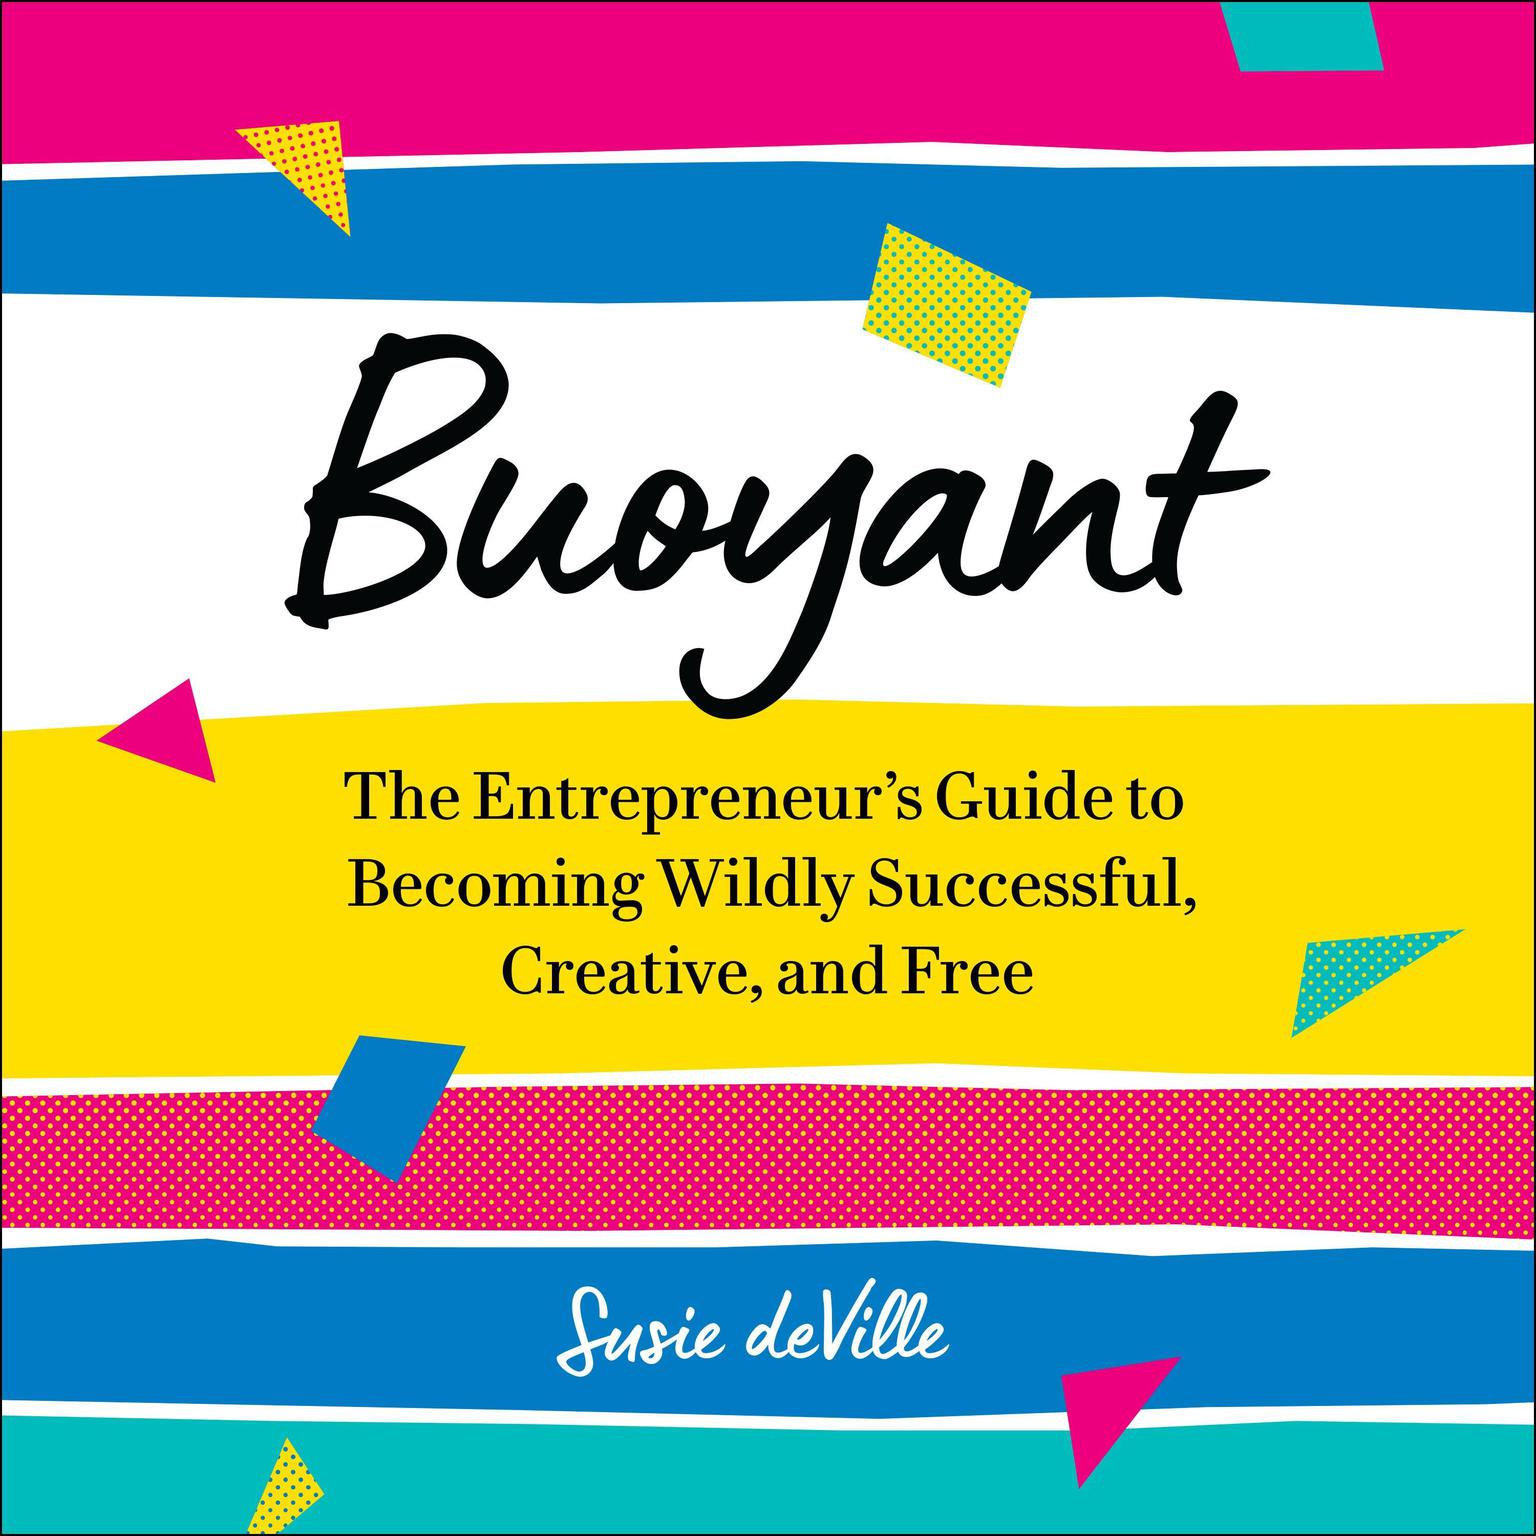 Buoyant: The Entrepreneur’s Guide to Becoming Wildly Successful, Creative, and Free Audiobook, by Susie deVille